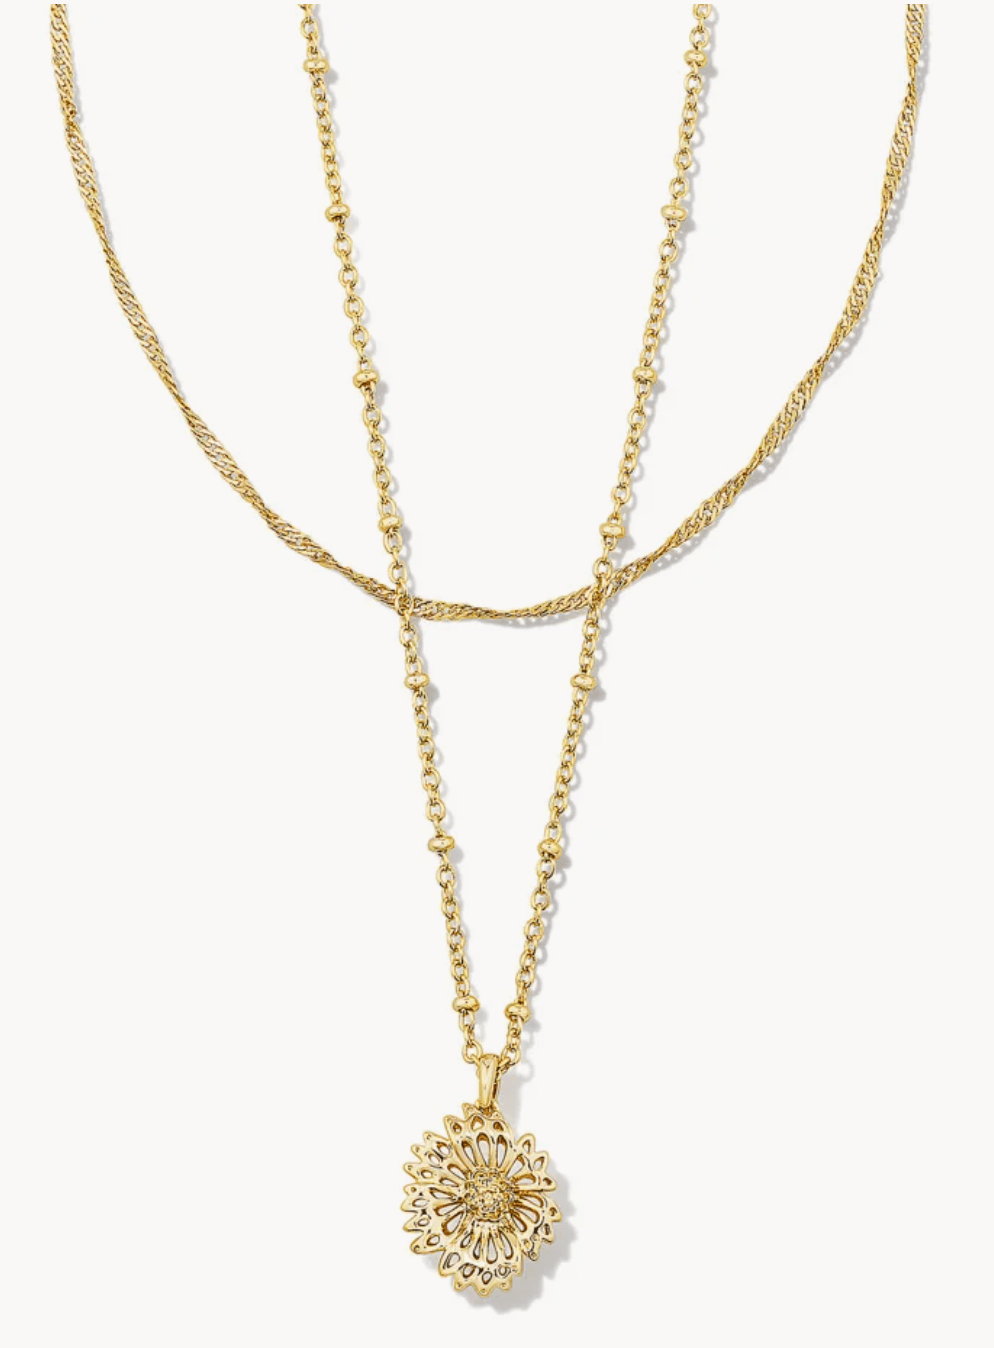 Kendra Scott - Brielle Multi Strand Necklace in Gold - Findlay Rowe Designs